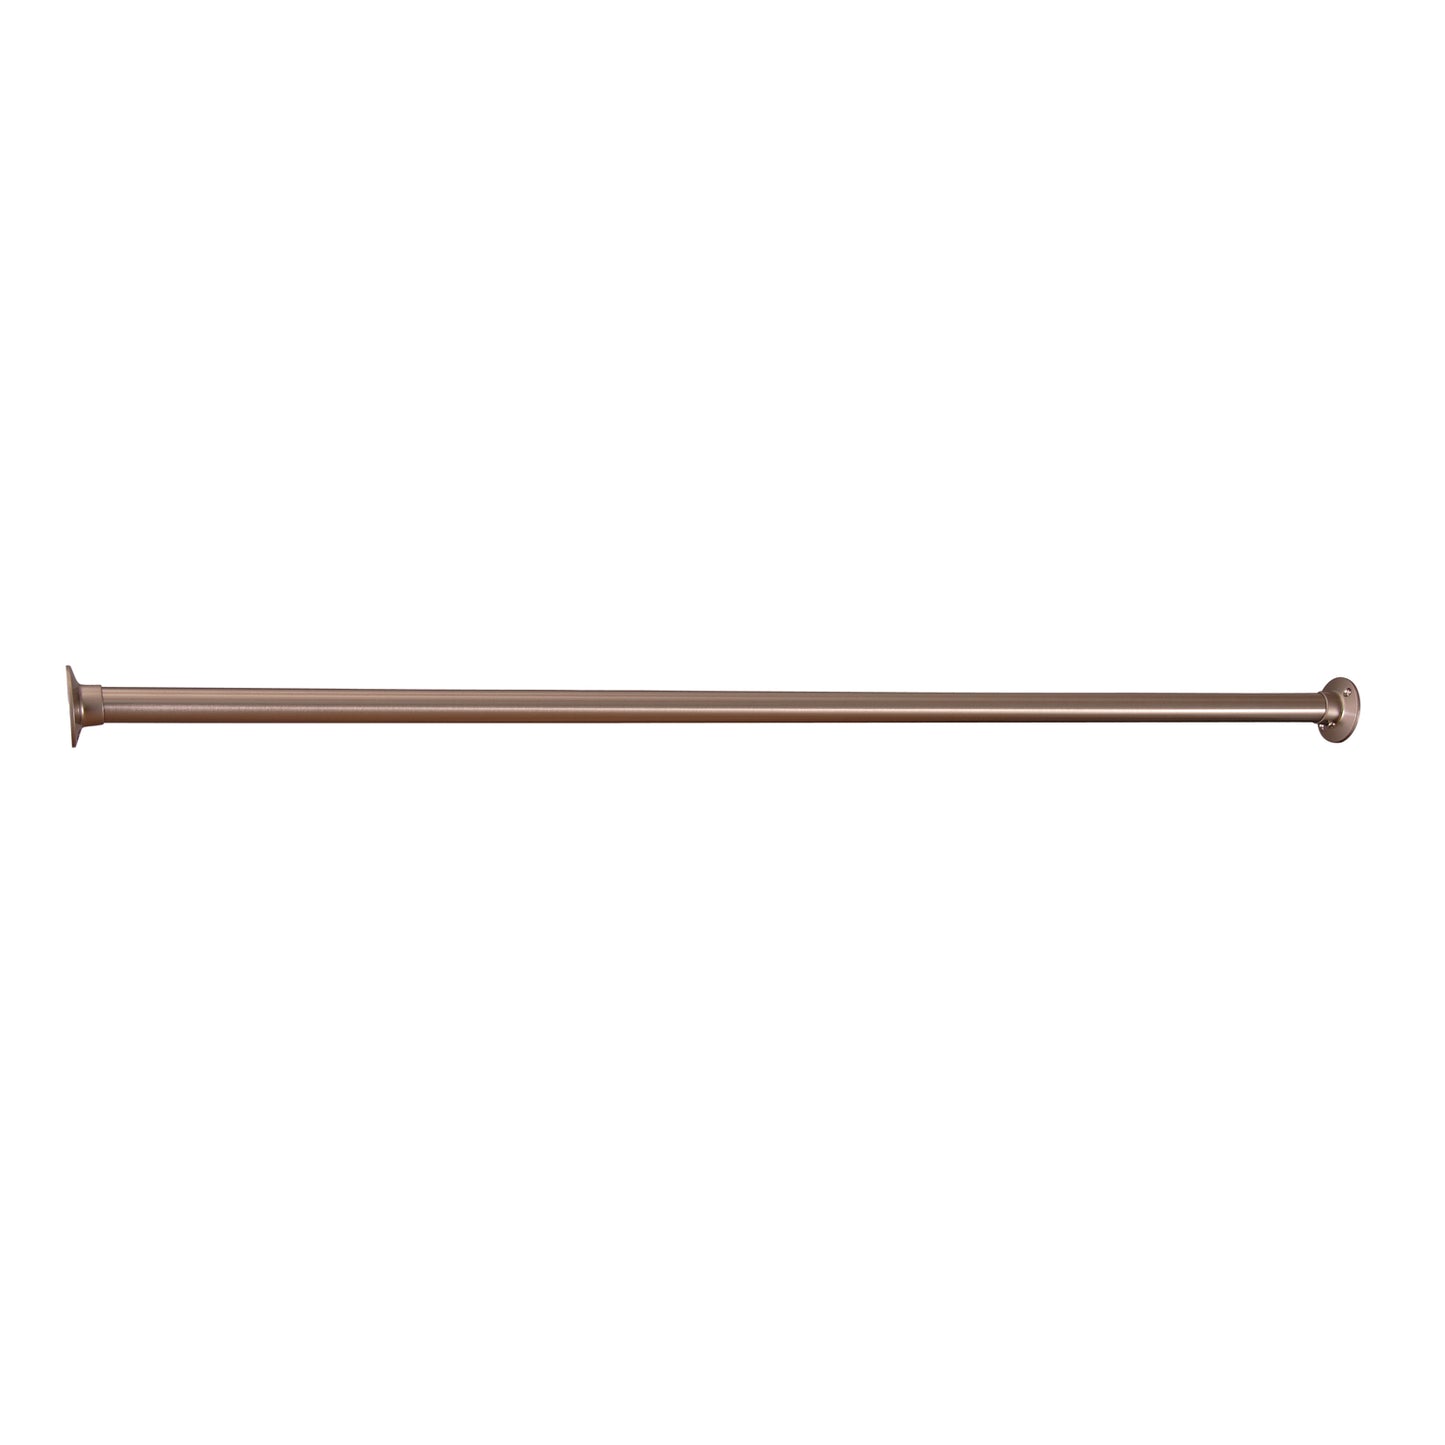 72" Straight Shower Rod in Brushed Nickel